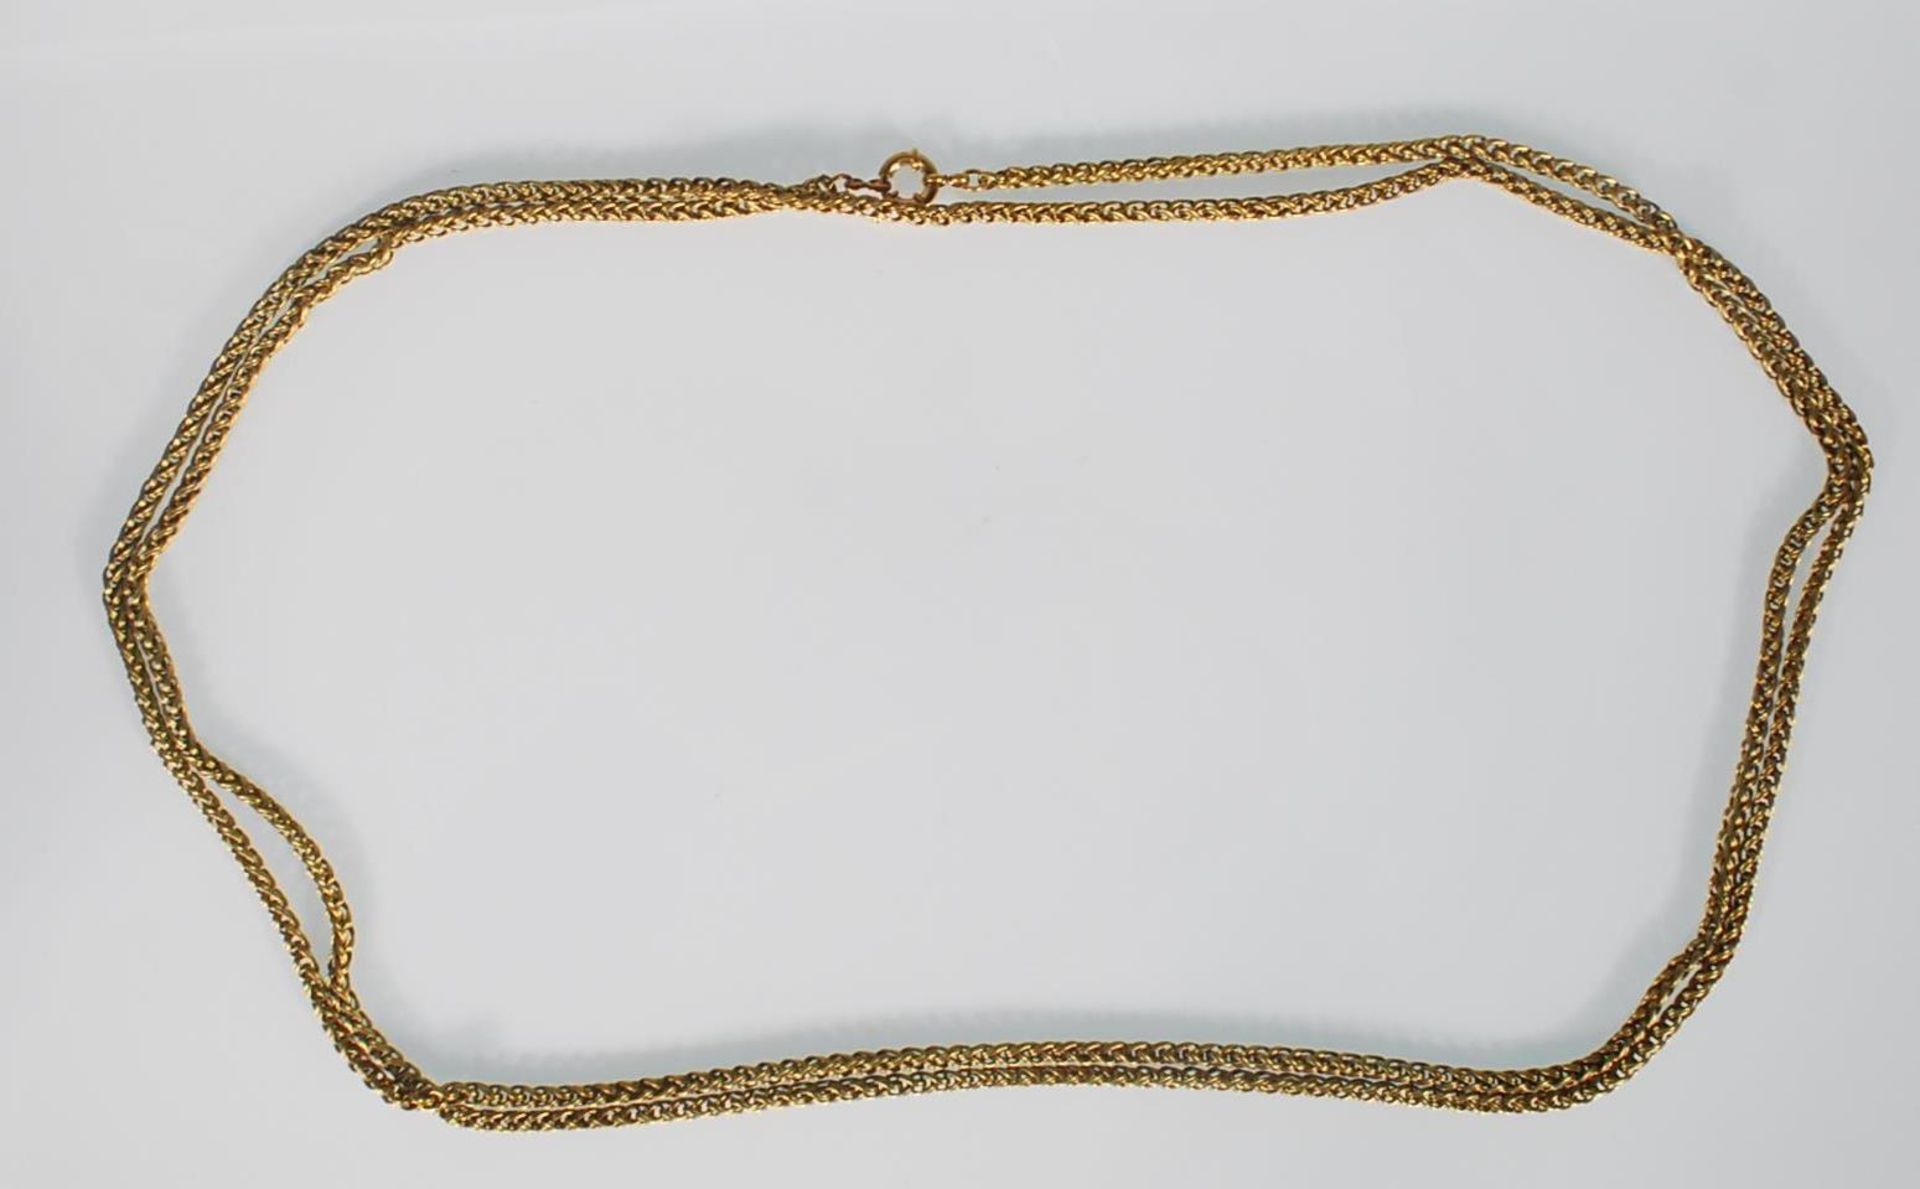 A 20th Century brass guard watch chain with woven links and a spring ring clasp. Measures: 62